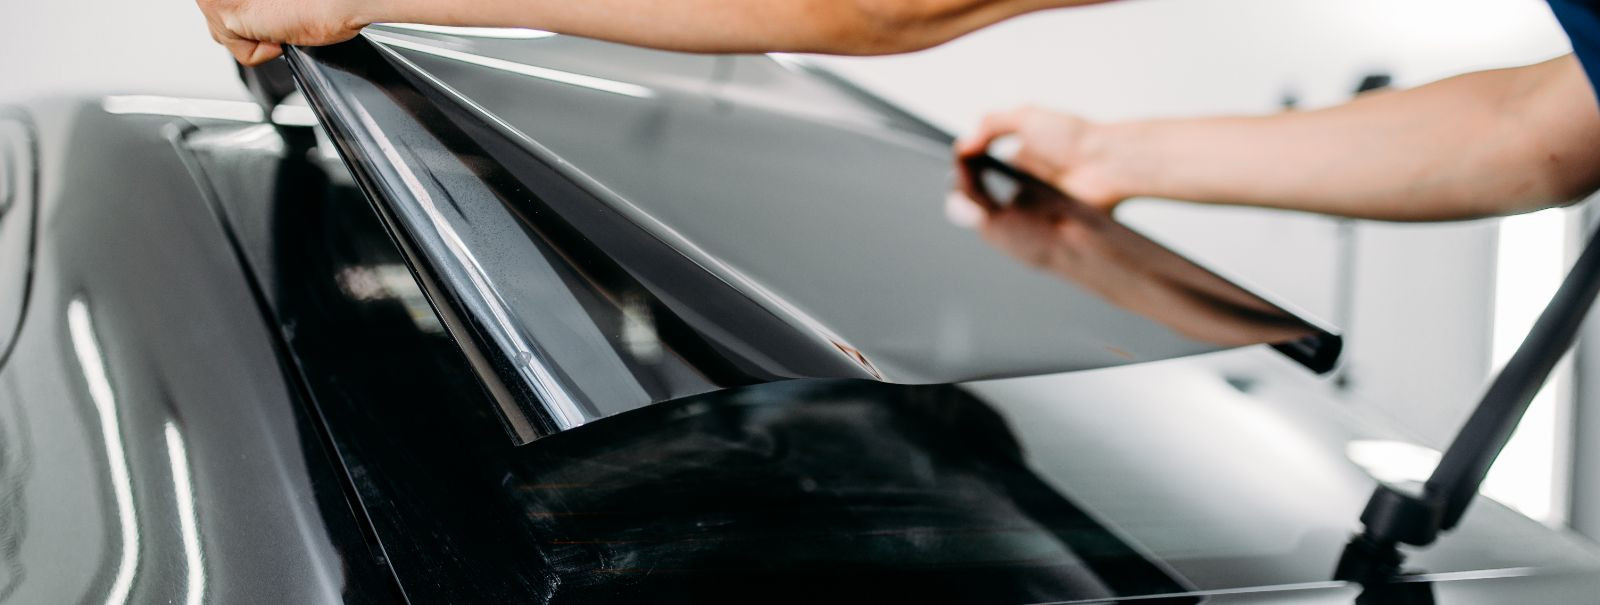 Vehicle glass is critical for safety, visibility, and comfort. A chip or crack can compromise the structural integrity of the glass, leading to potential safety